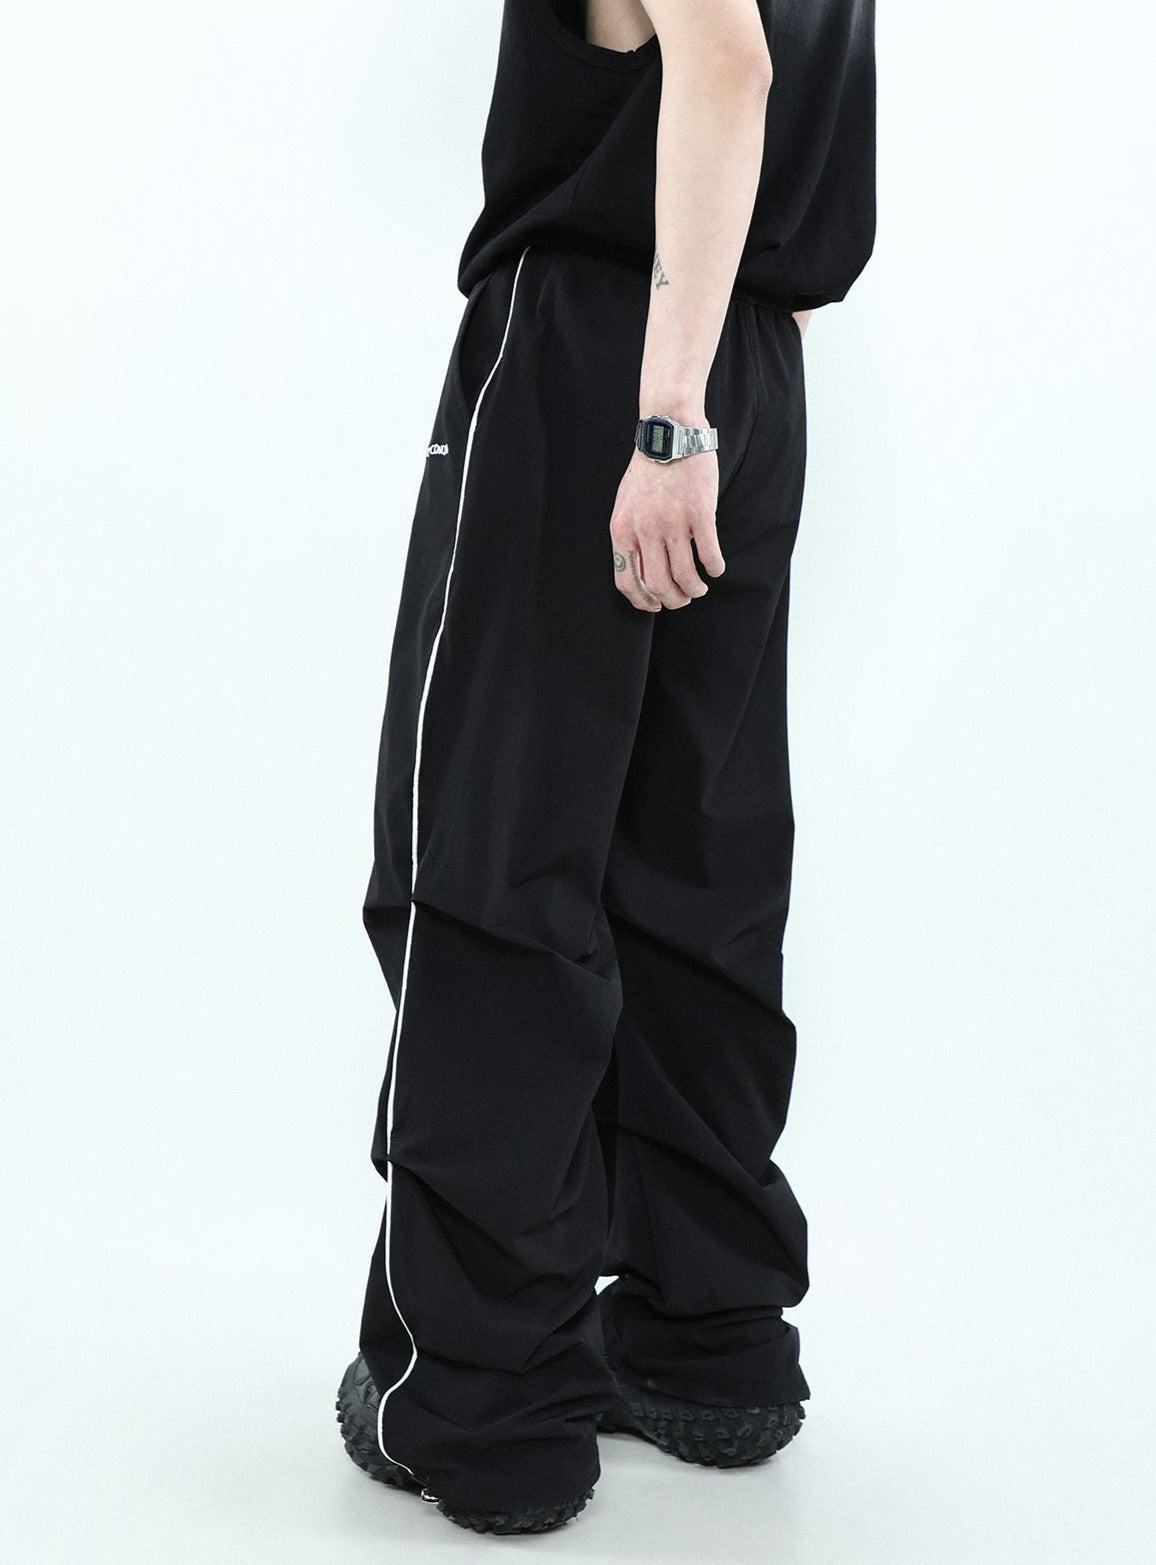 Mr Nearly Text Embroidery Pleated Wide Leg Pants Korean Street Fashion Pants By Mr Nearly Shop Online at OH Vault